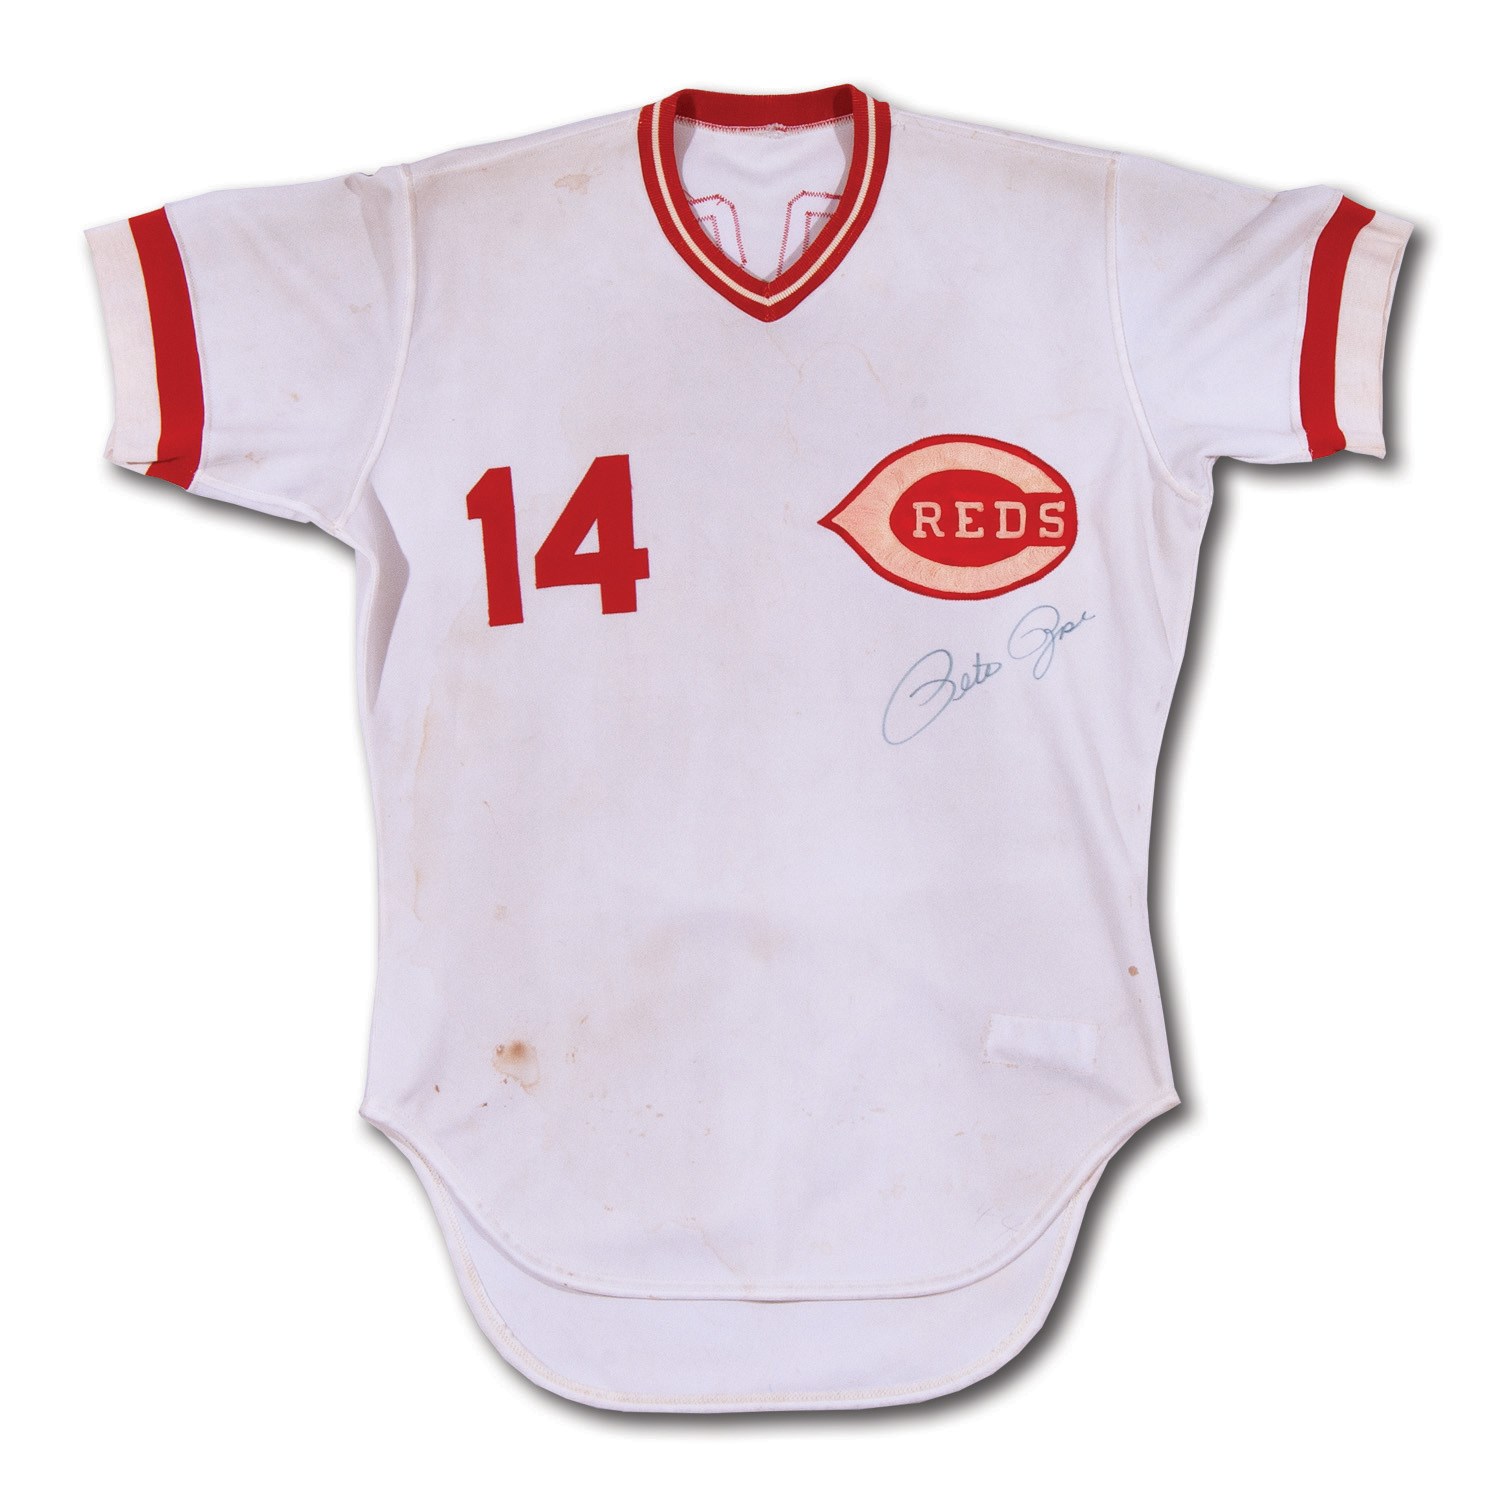 pete rose jersey number